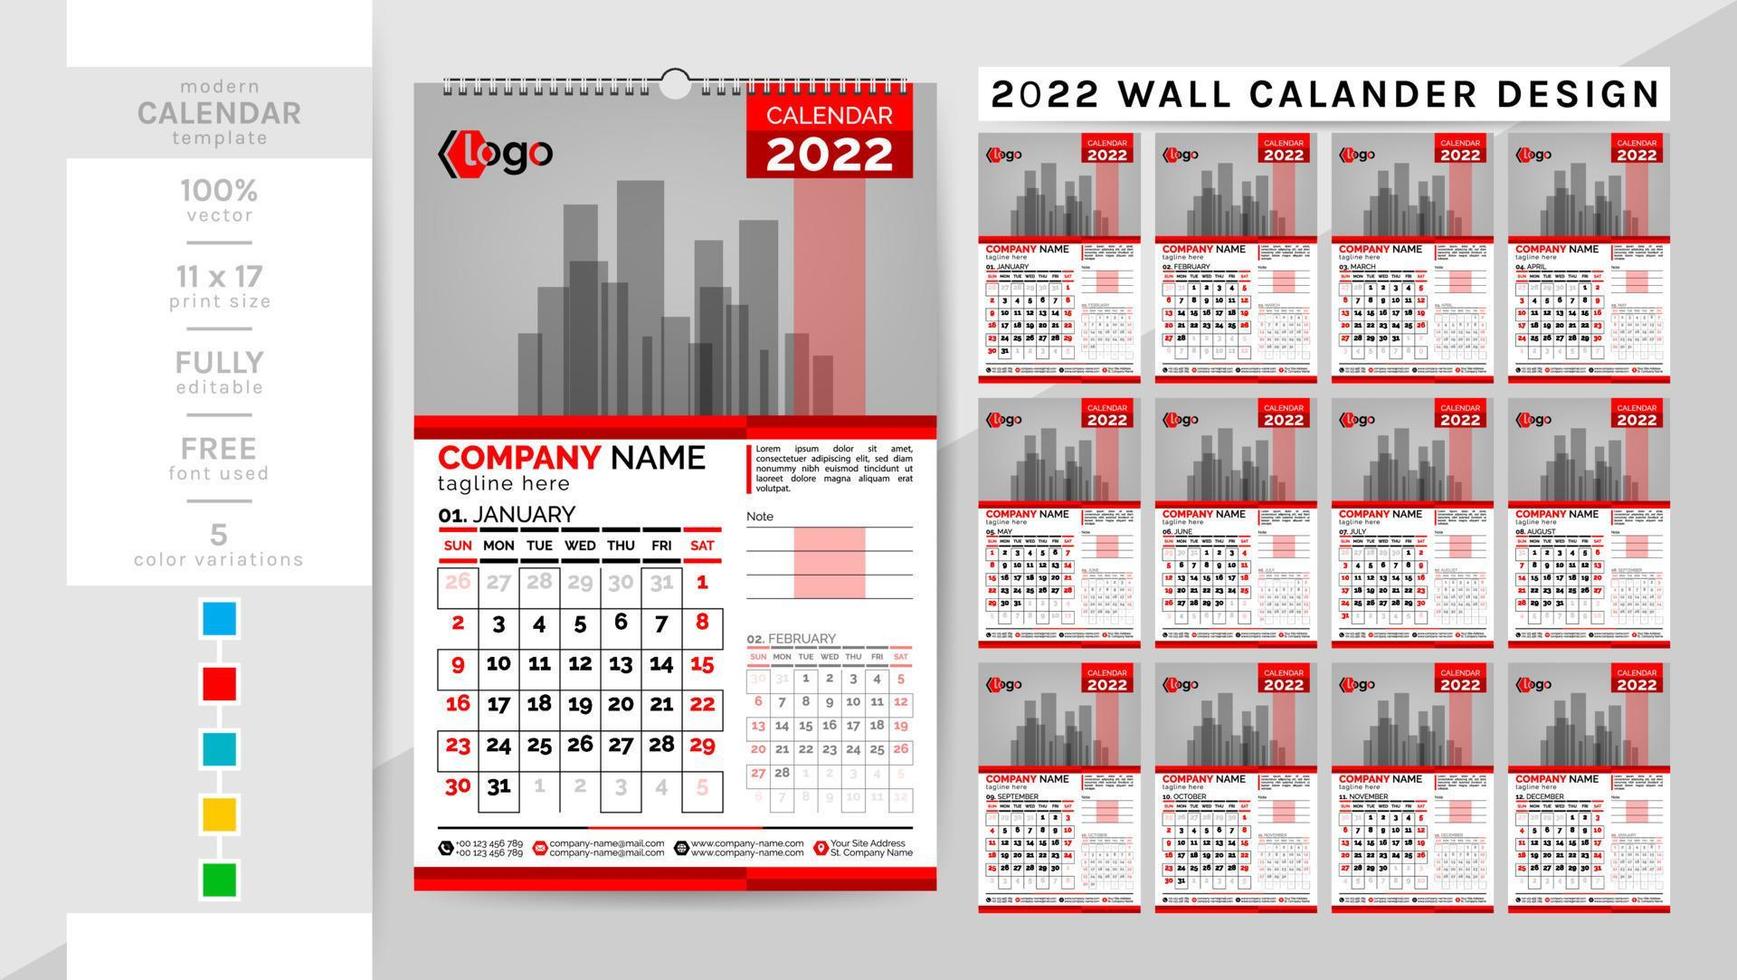 Wall calendar and planner diary template for the year 2022. This creative elegant calendar is a must for your home and office. 2 theme colorwork, black, and others. The 12-page week begins on Sunday. vector